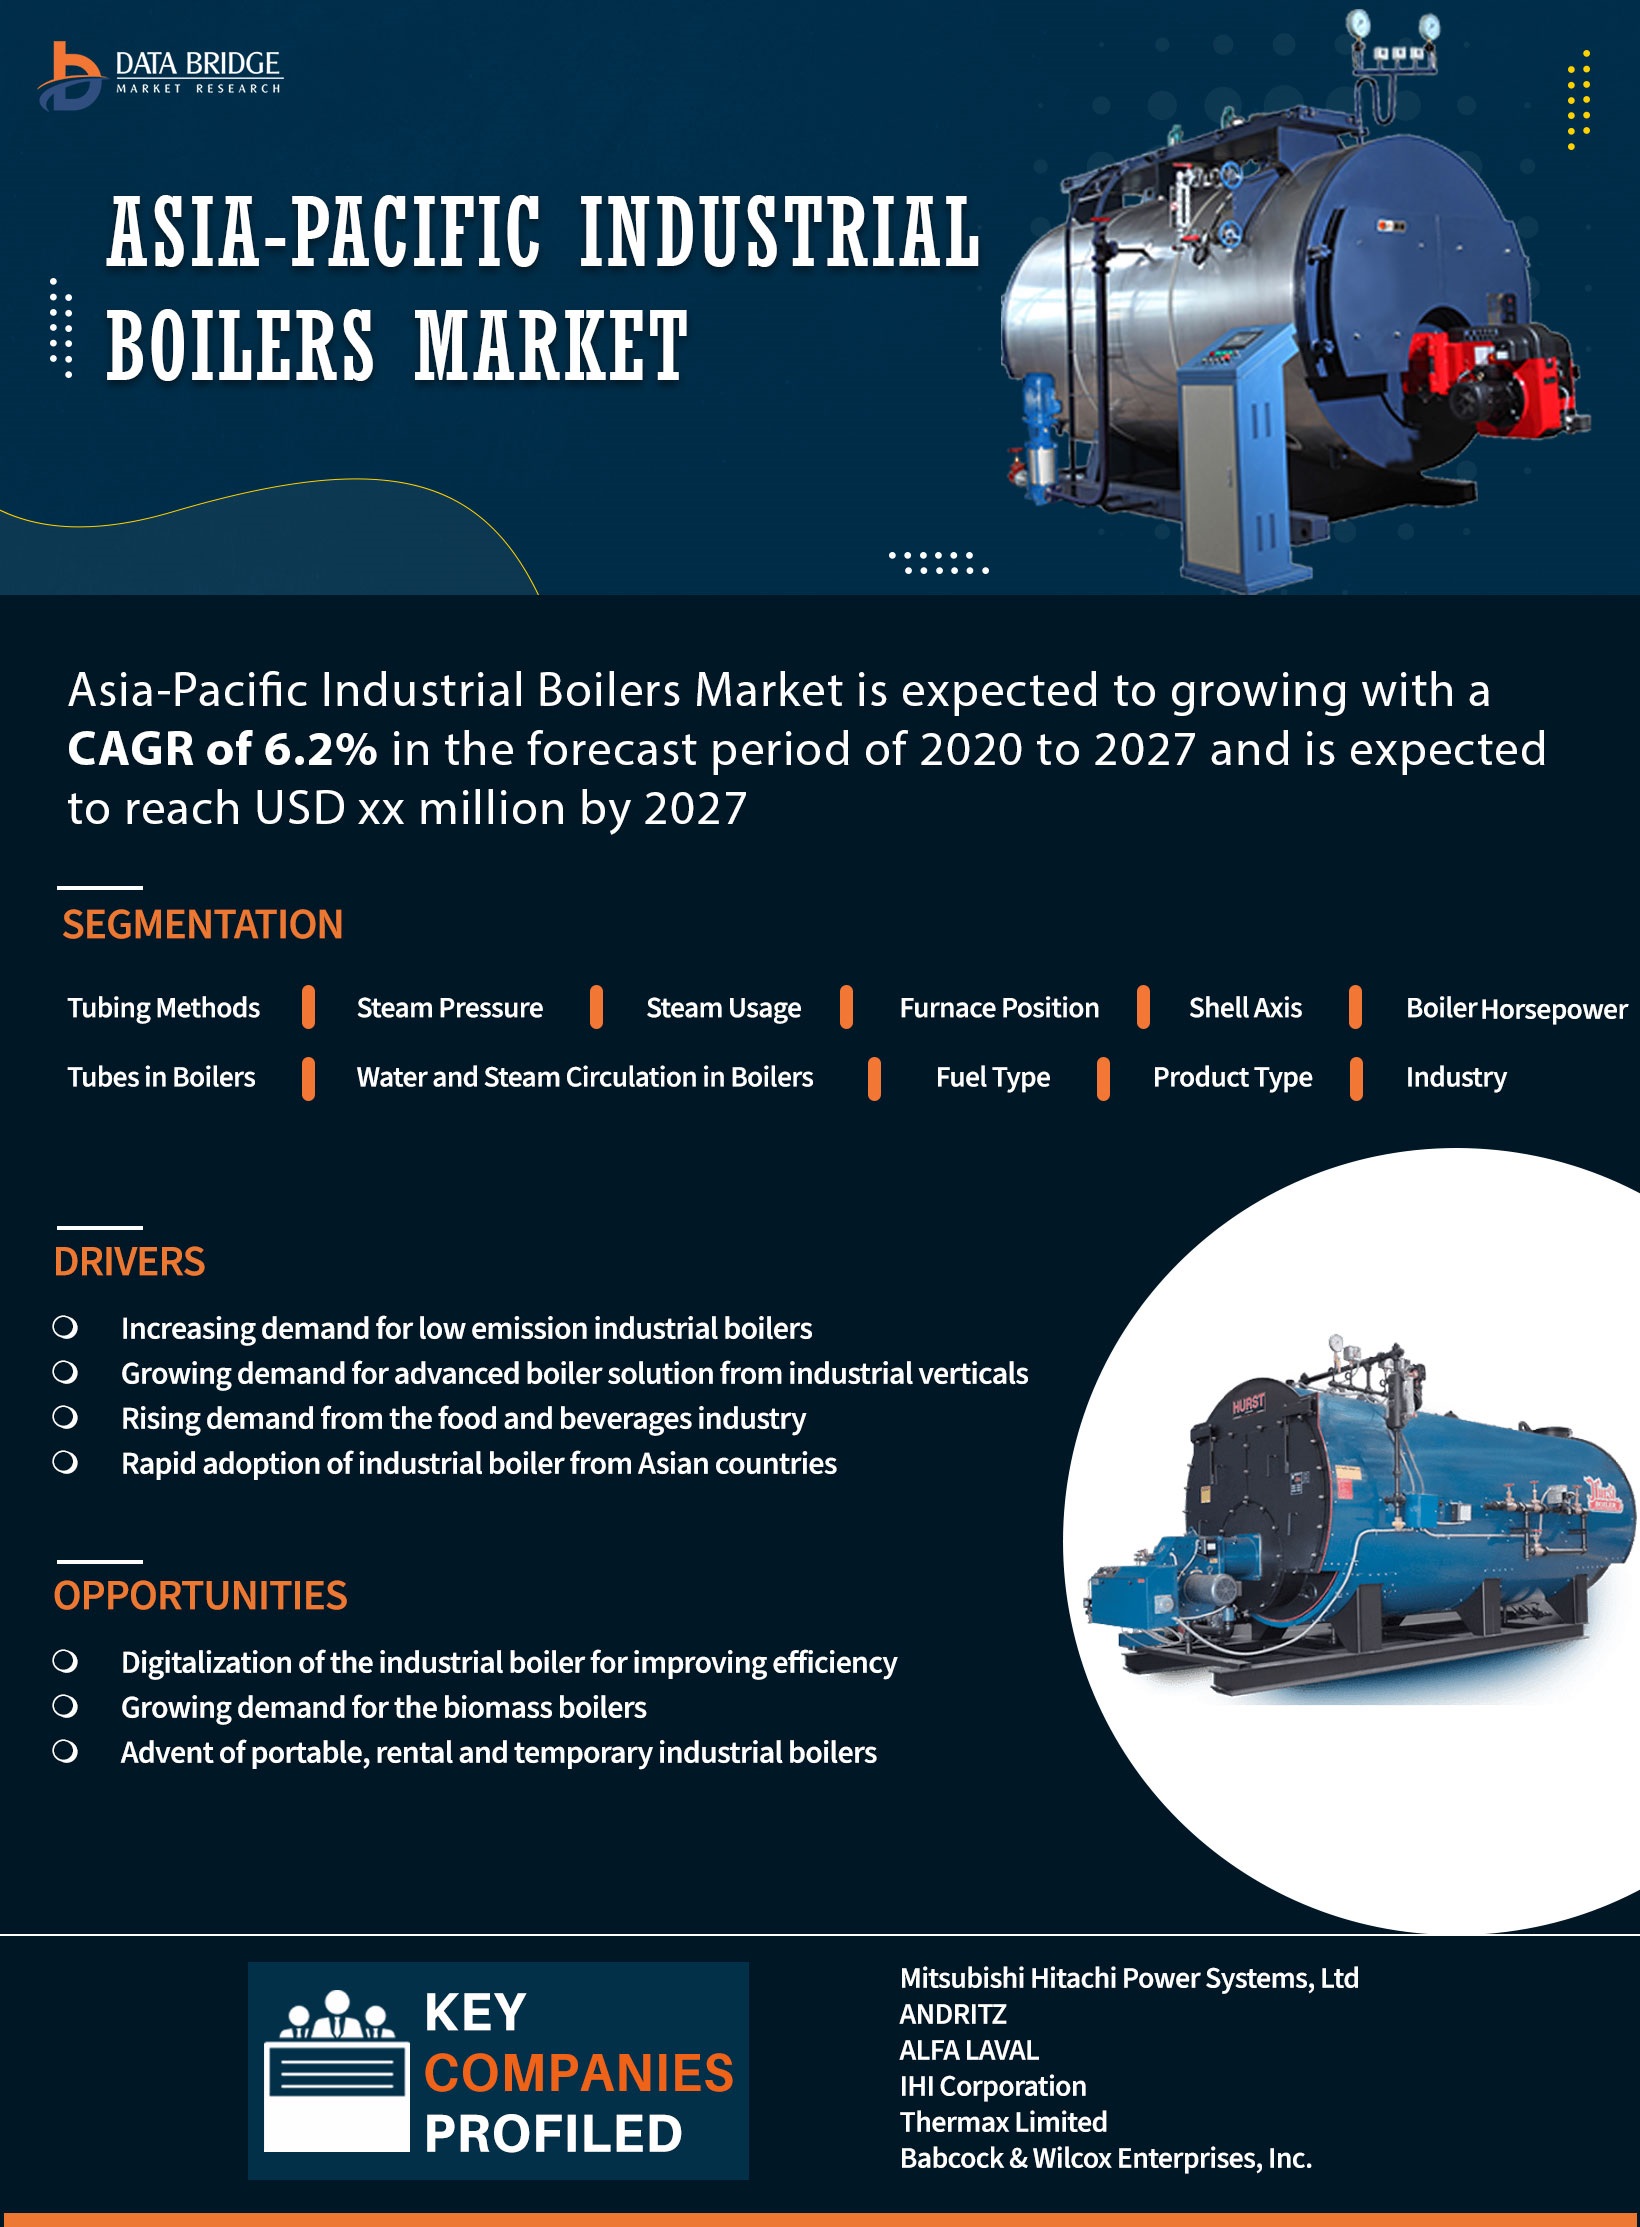 Asia-Pacific Industrial Boilers Market